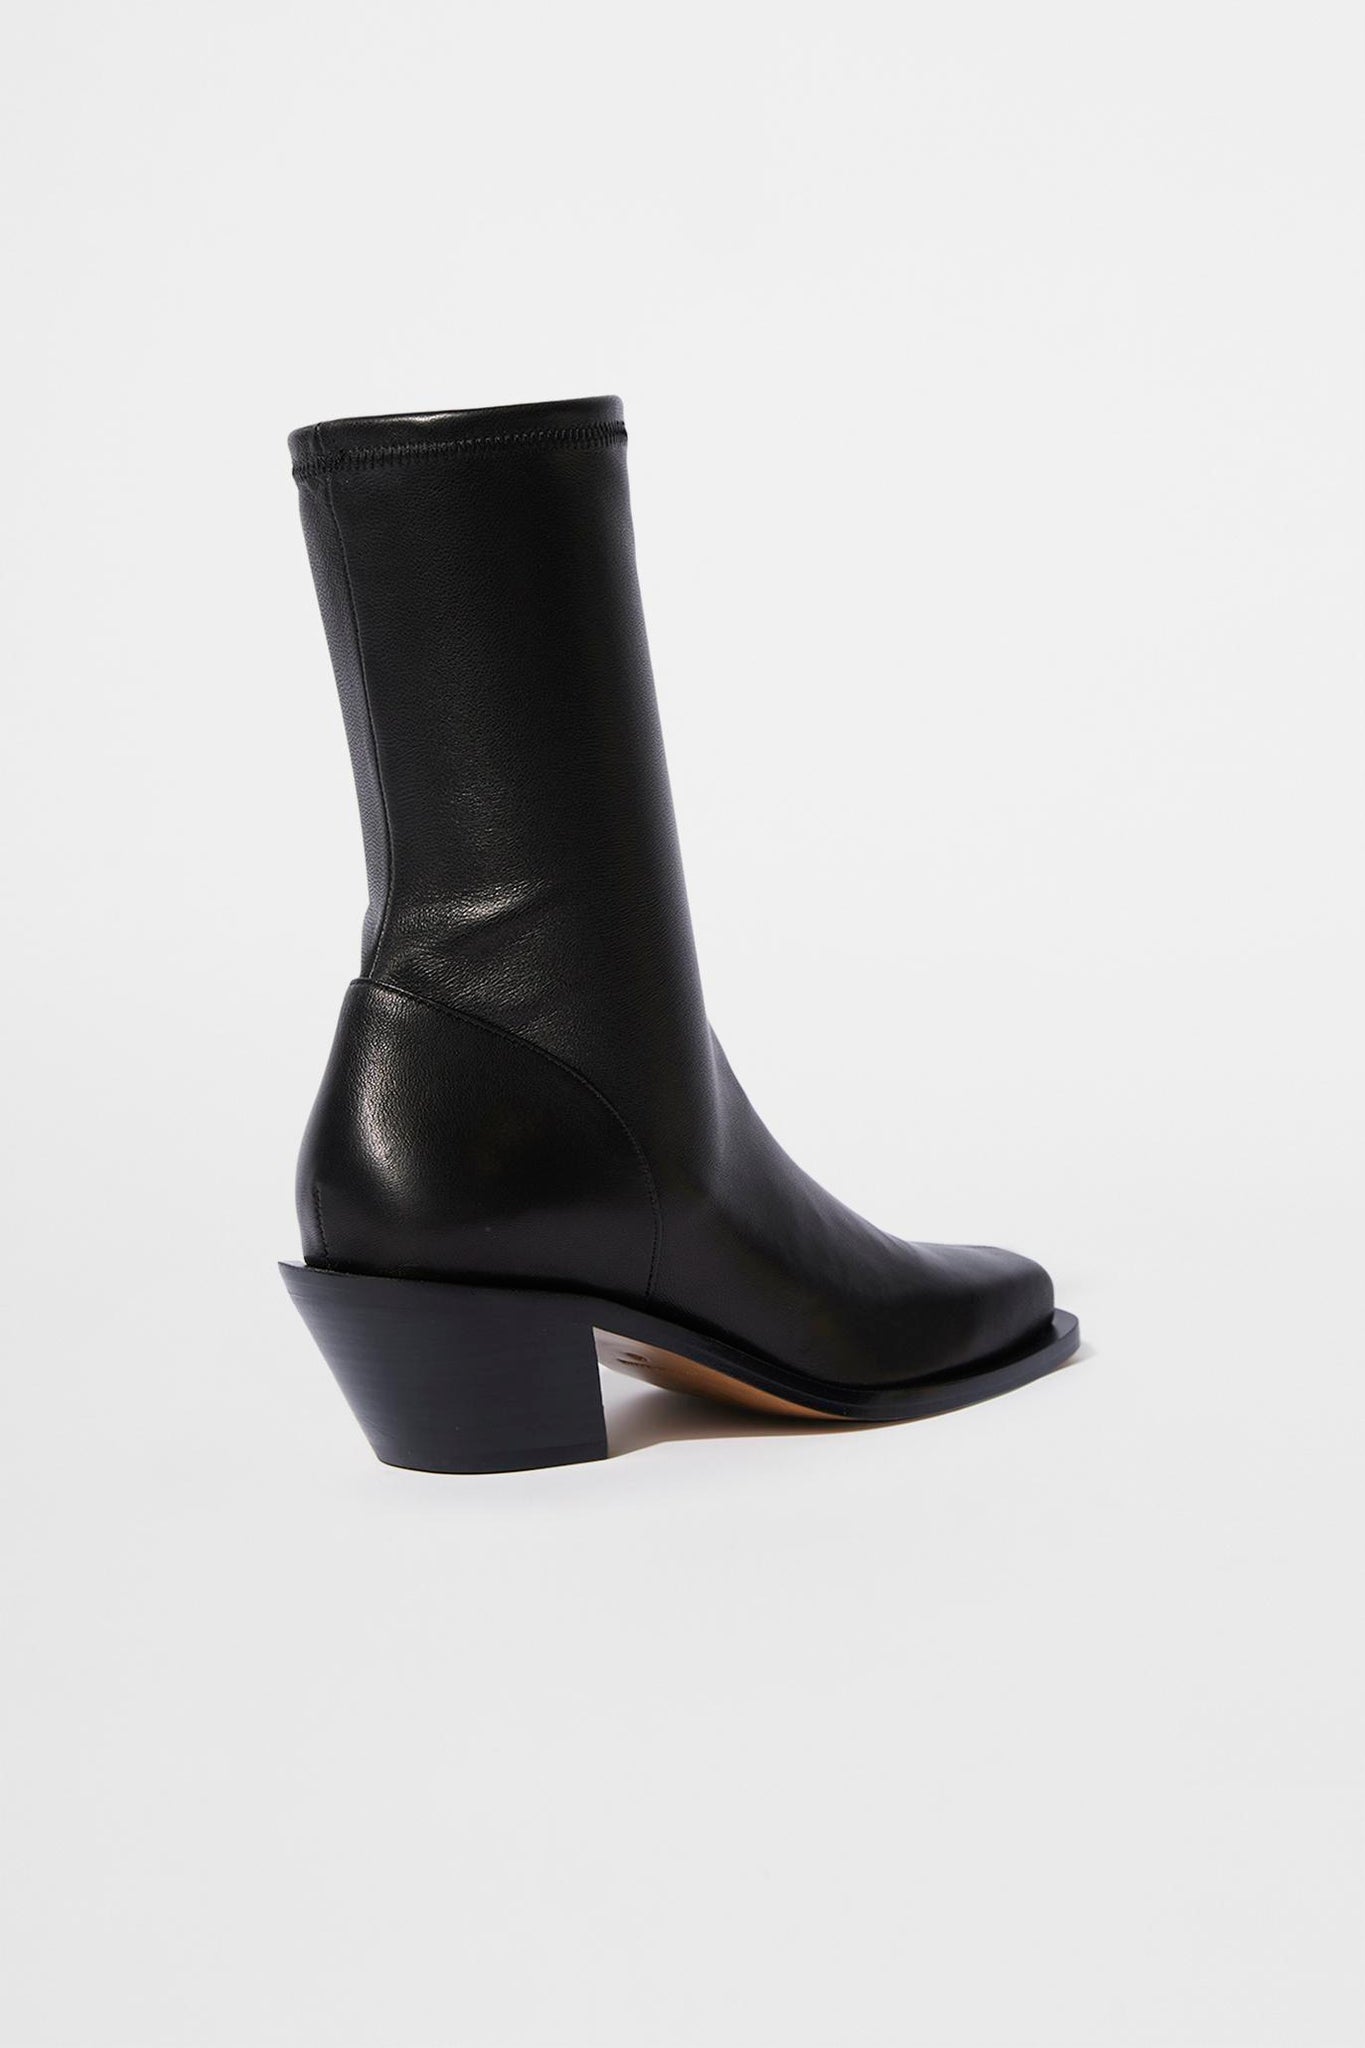 Livvy Vegan Leather Heeled Boots